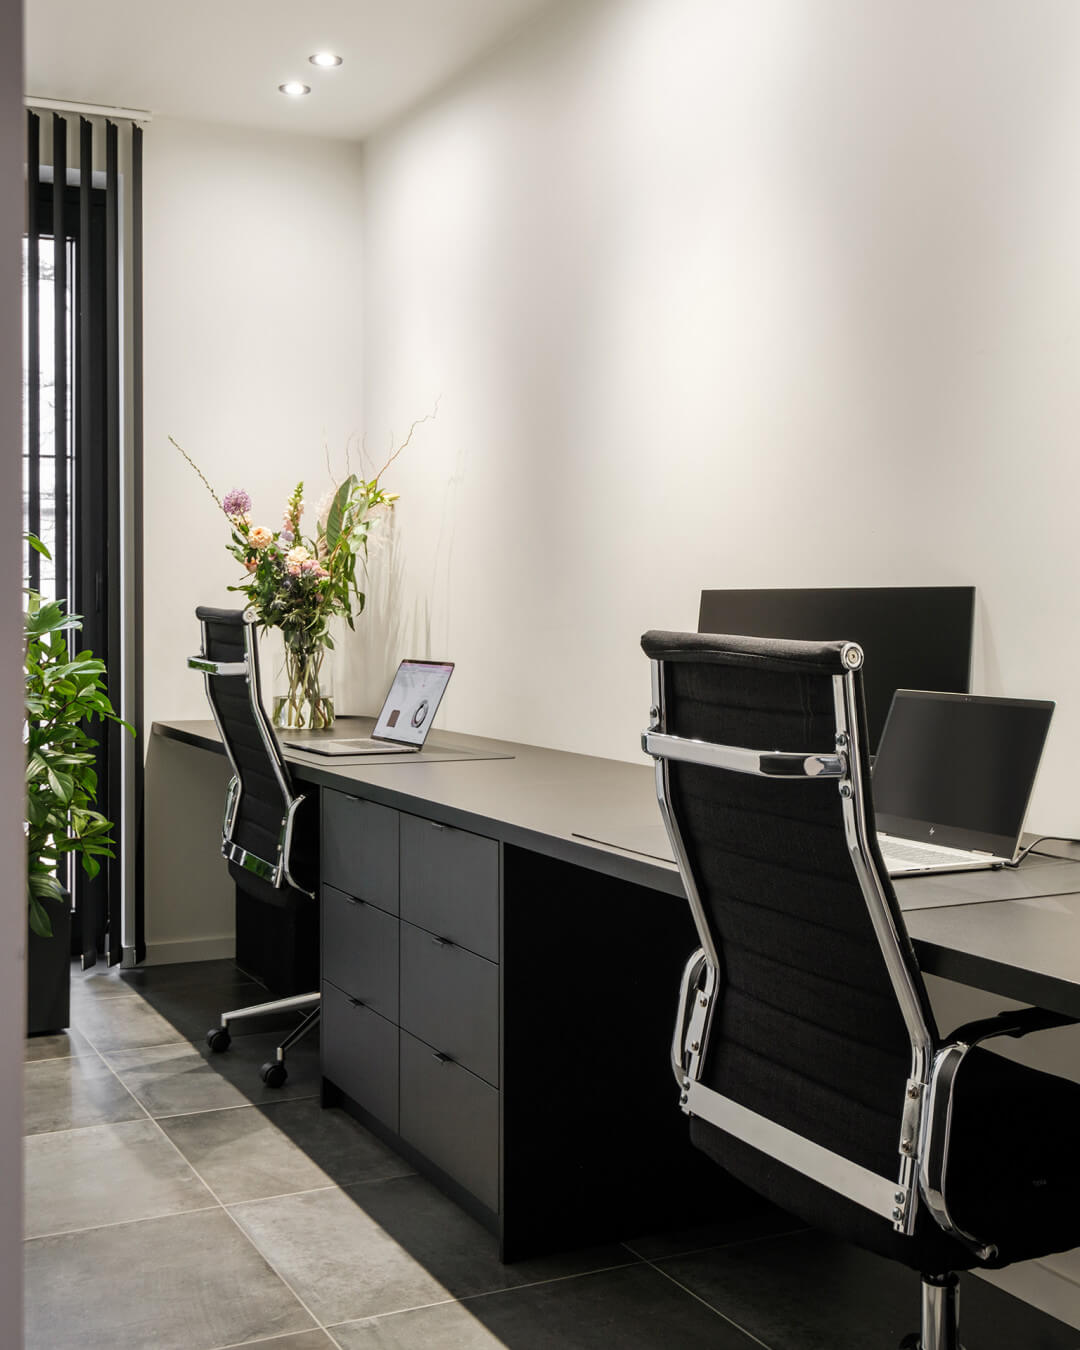 made-to-measure office space in black wood shade